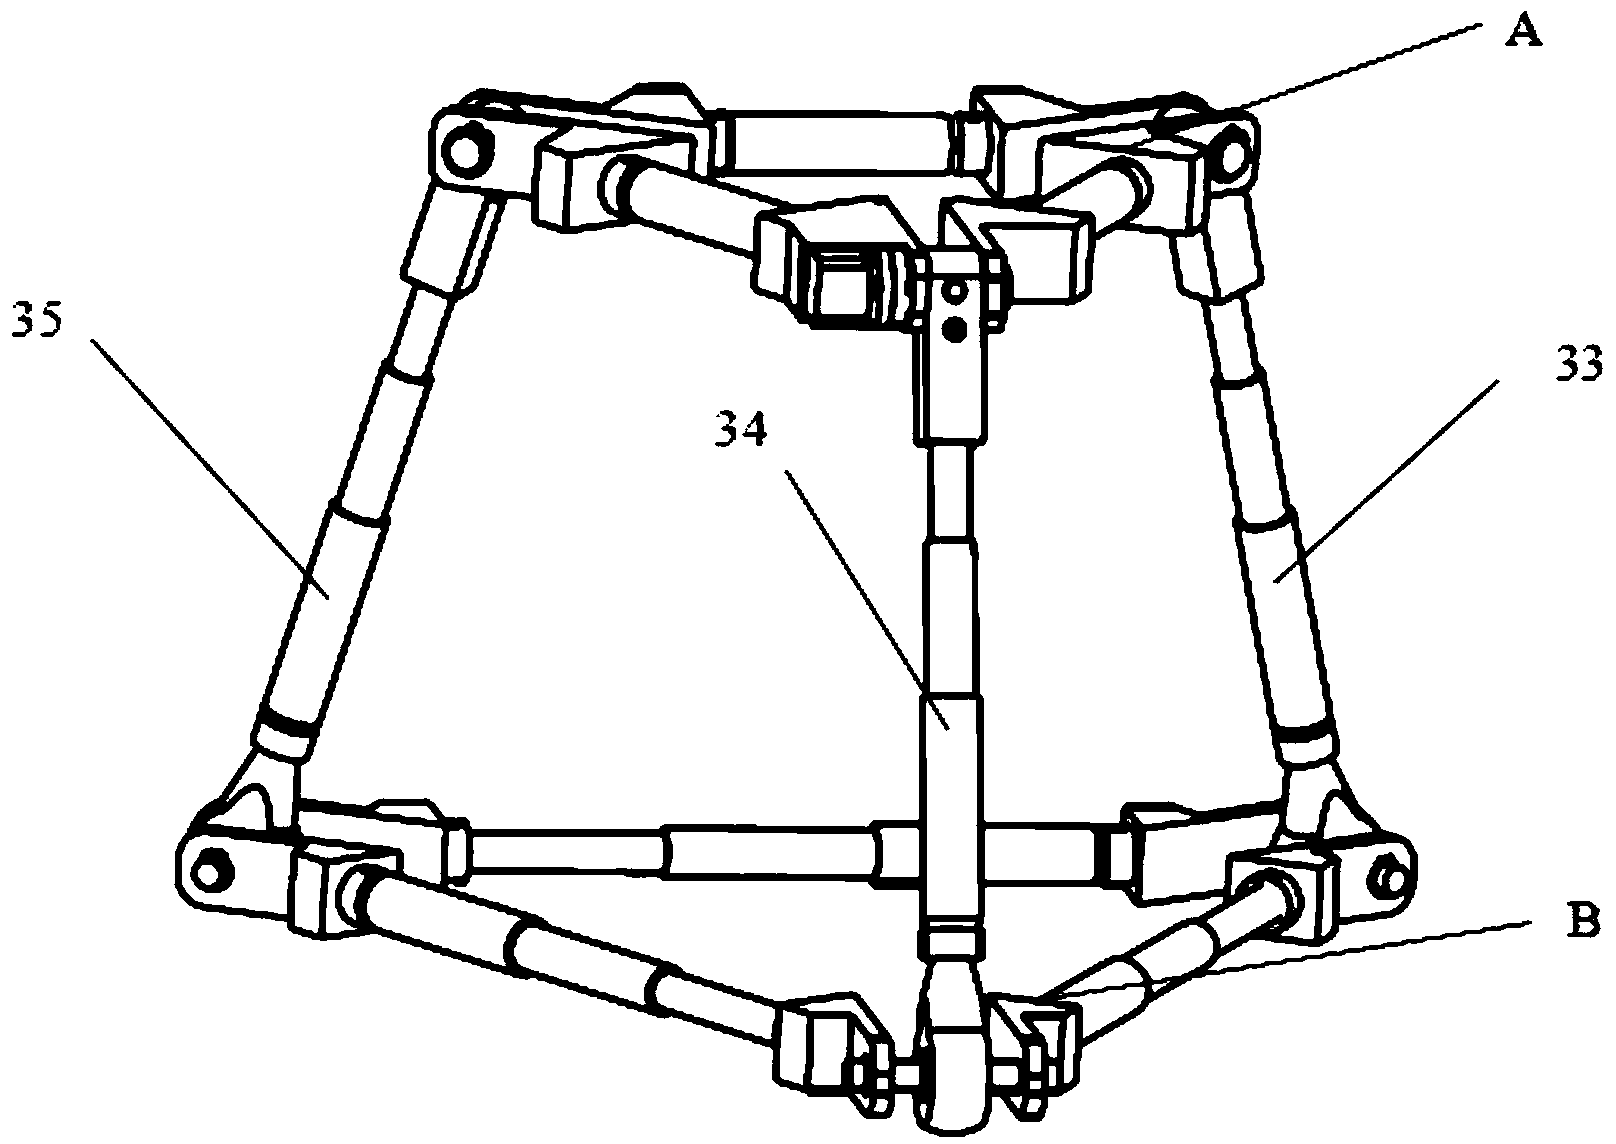 Telescopic and insertable moving mechanism